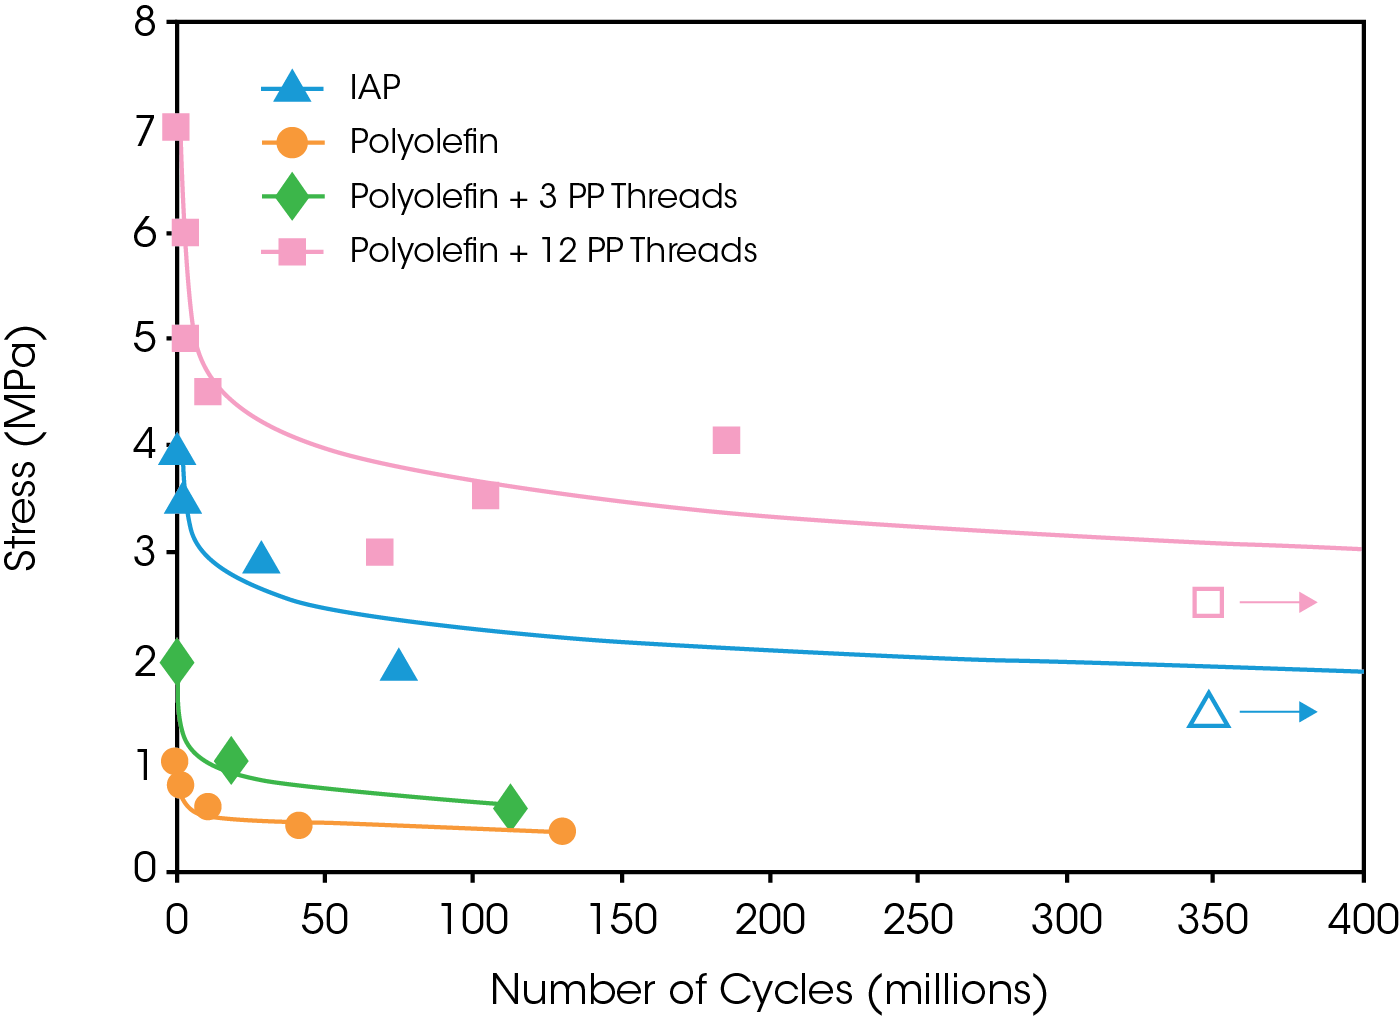 Figure 4. Fatigue Results showing Applied Stress vs Number of Cycles to Failure (S-N Curve)